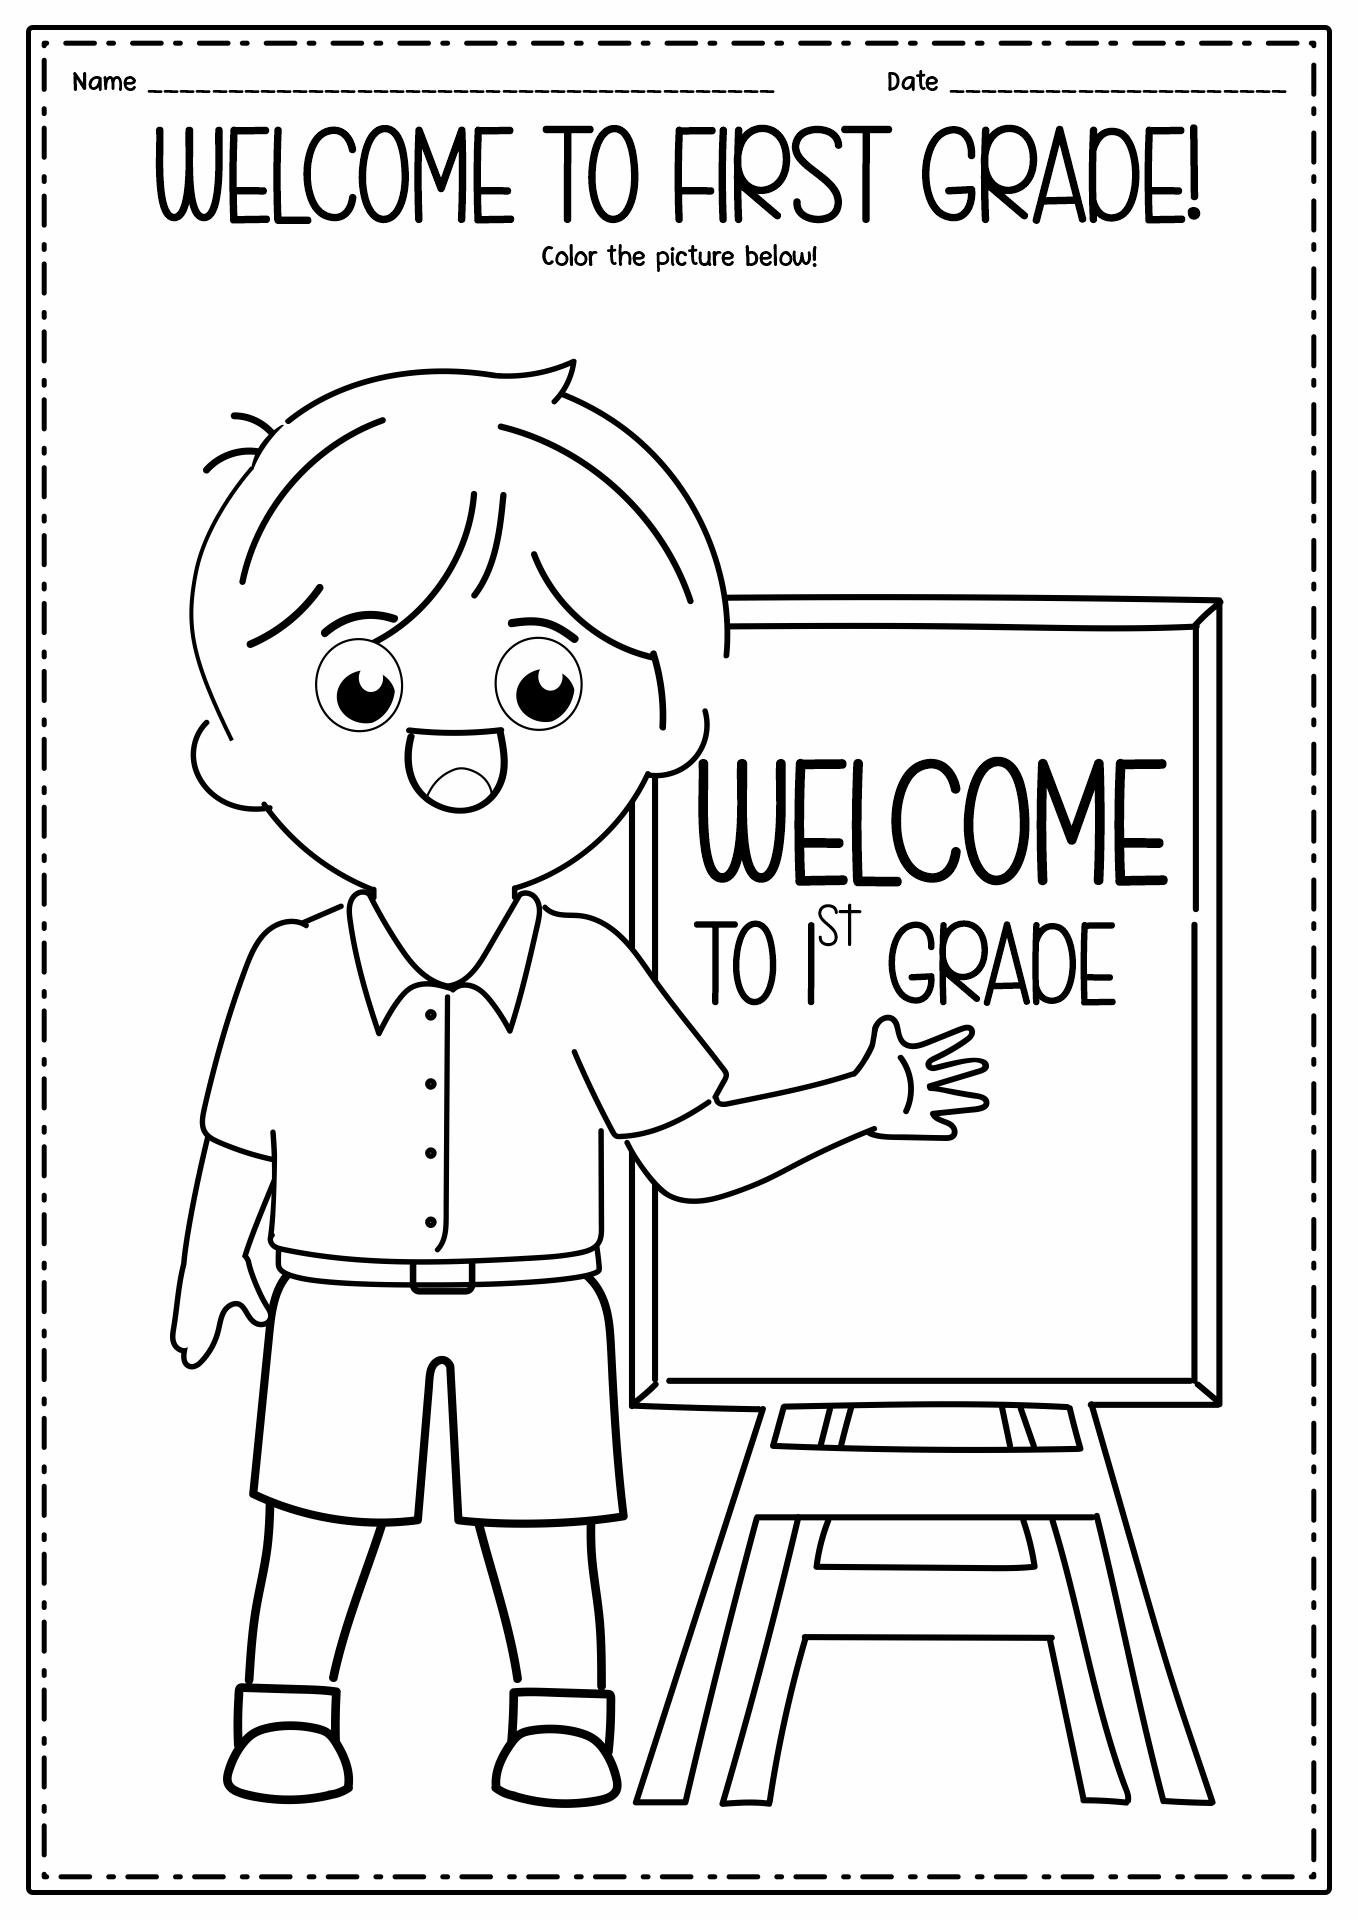 First Grade Coloring Pages Image